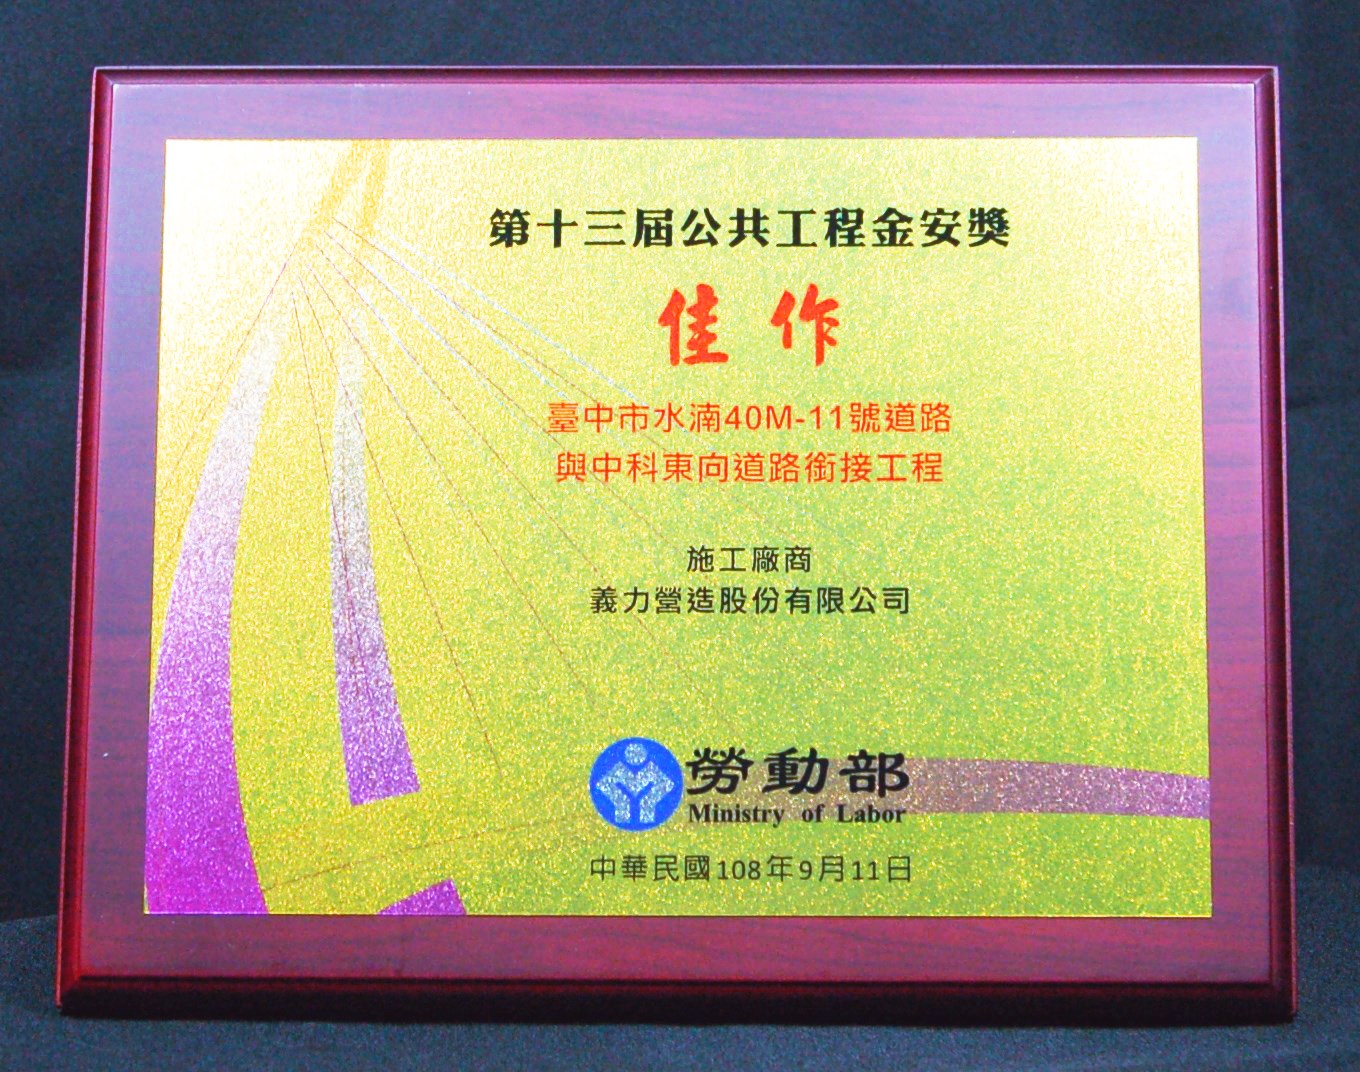 2019 Golden Safety Award of Honorable Mention: Shuinan 40M-11 and CTSP Road Connection Project